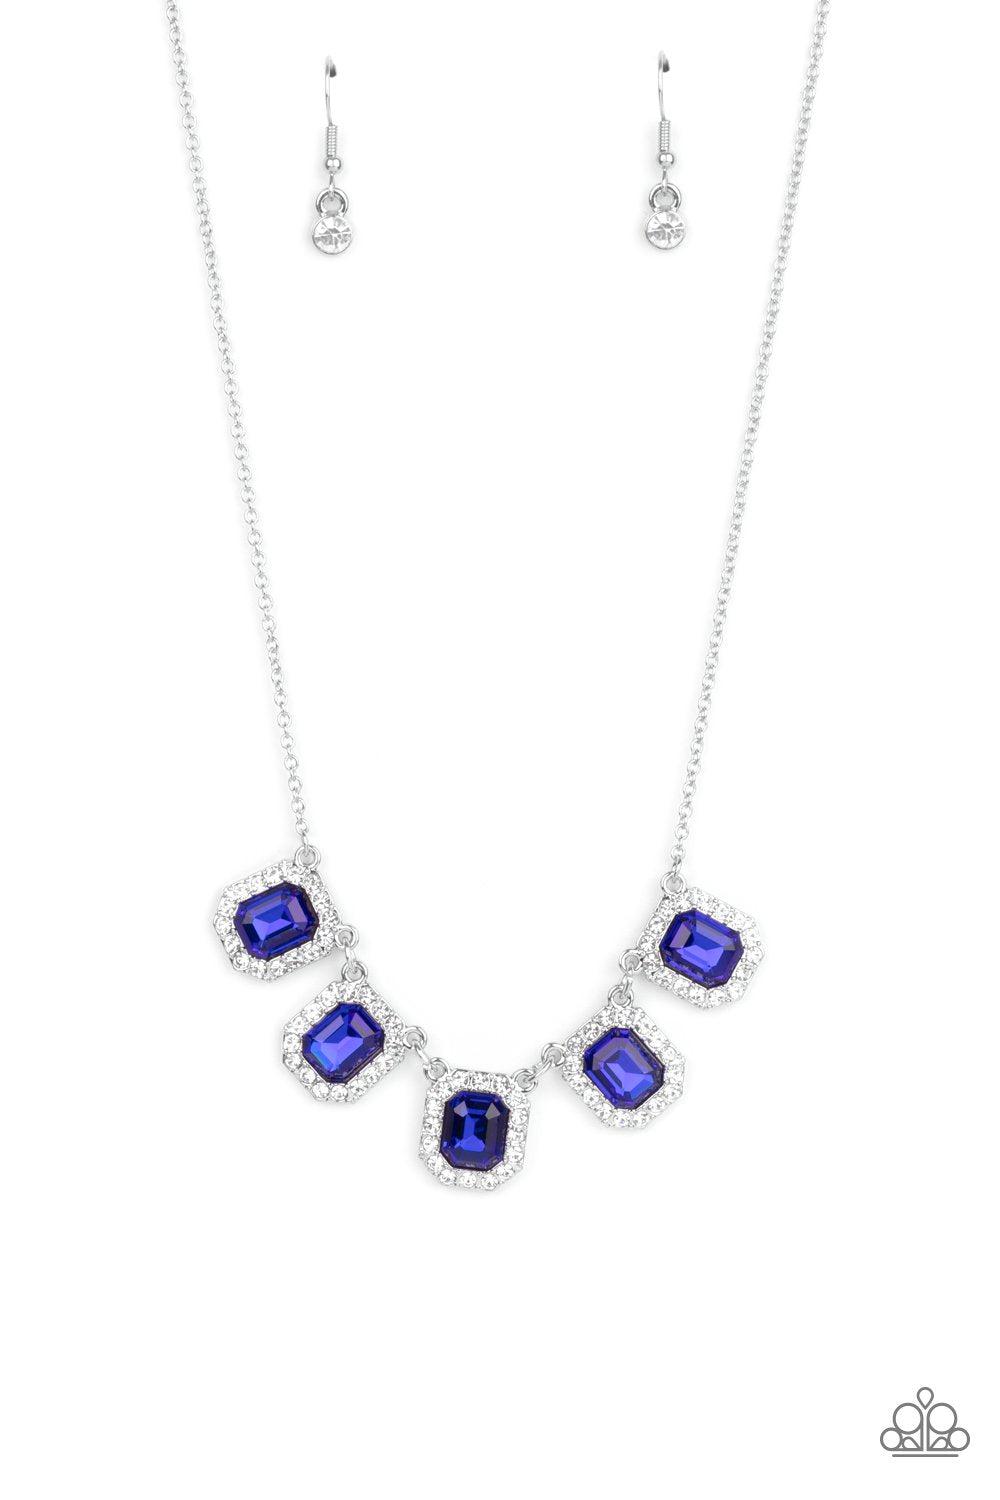 Next Level Luster Sapphire Blue Rhinestone Necklace - Paparazzi Accessories- lightbox - CarasShop.com - $5 Jewelry by Cara Jewels